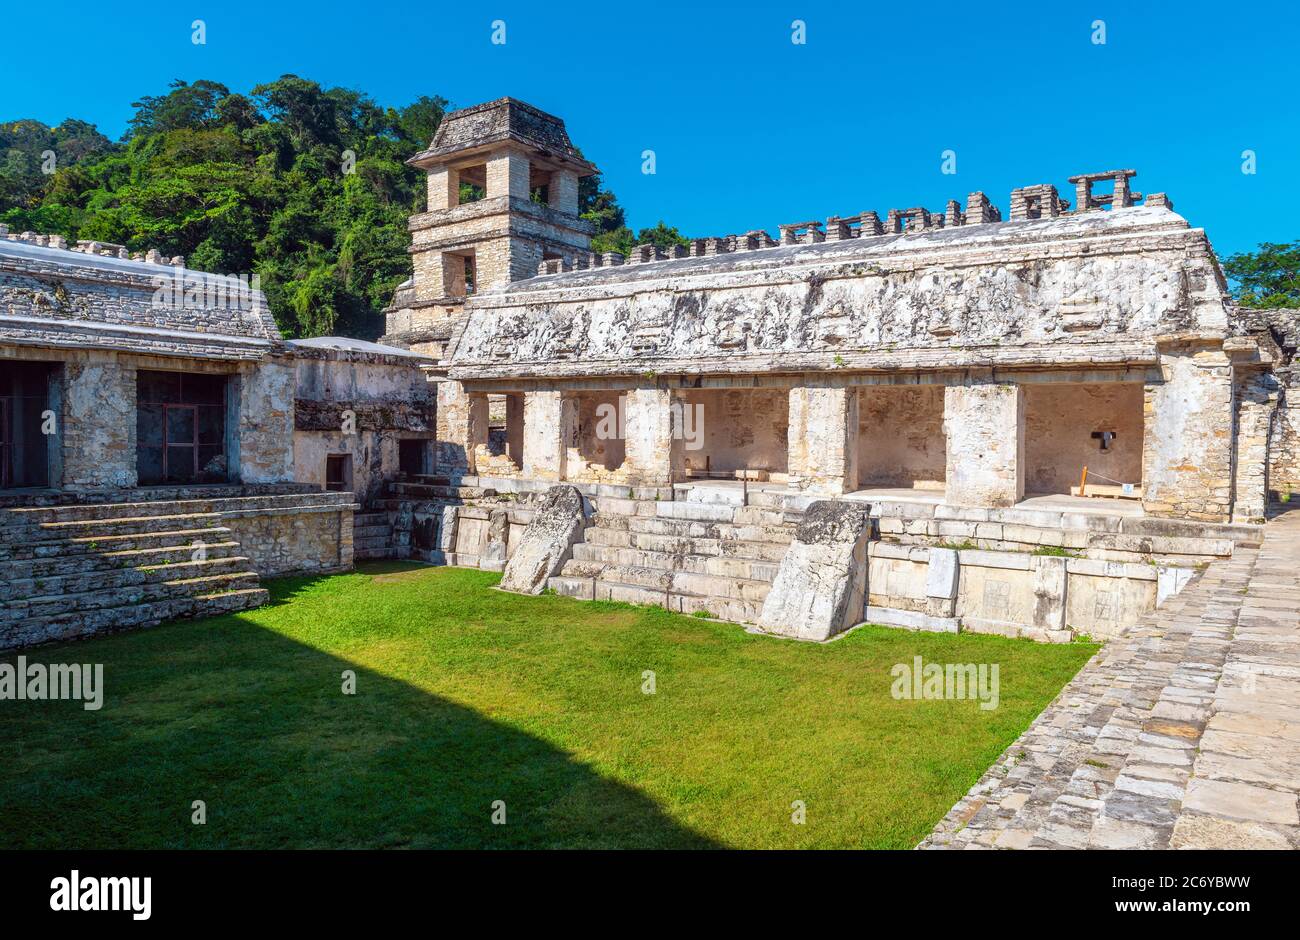 The Palace in the Maya archaeological site of Palenque, Chiapas, Mexico. Stock Photo